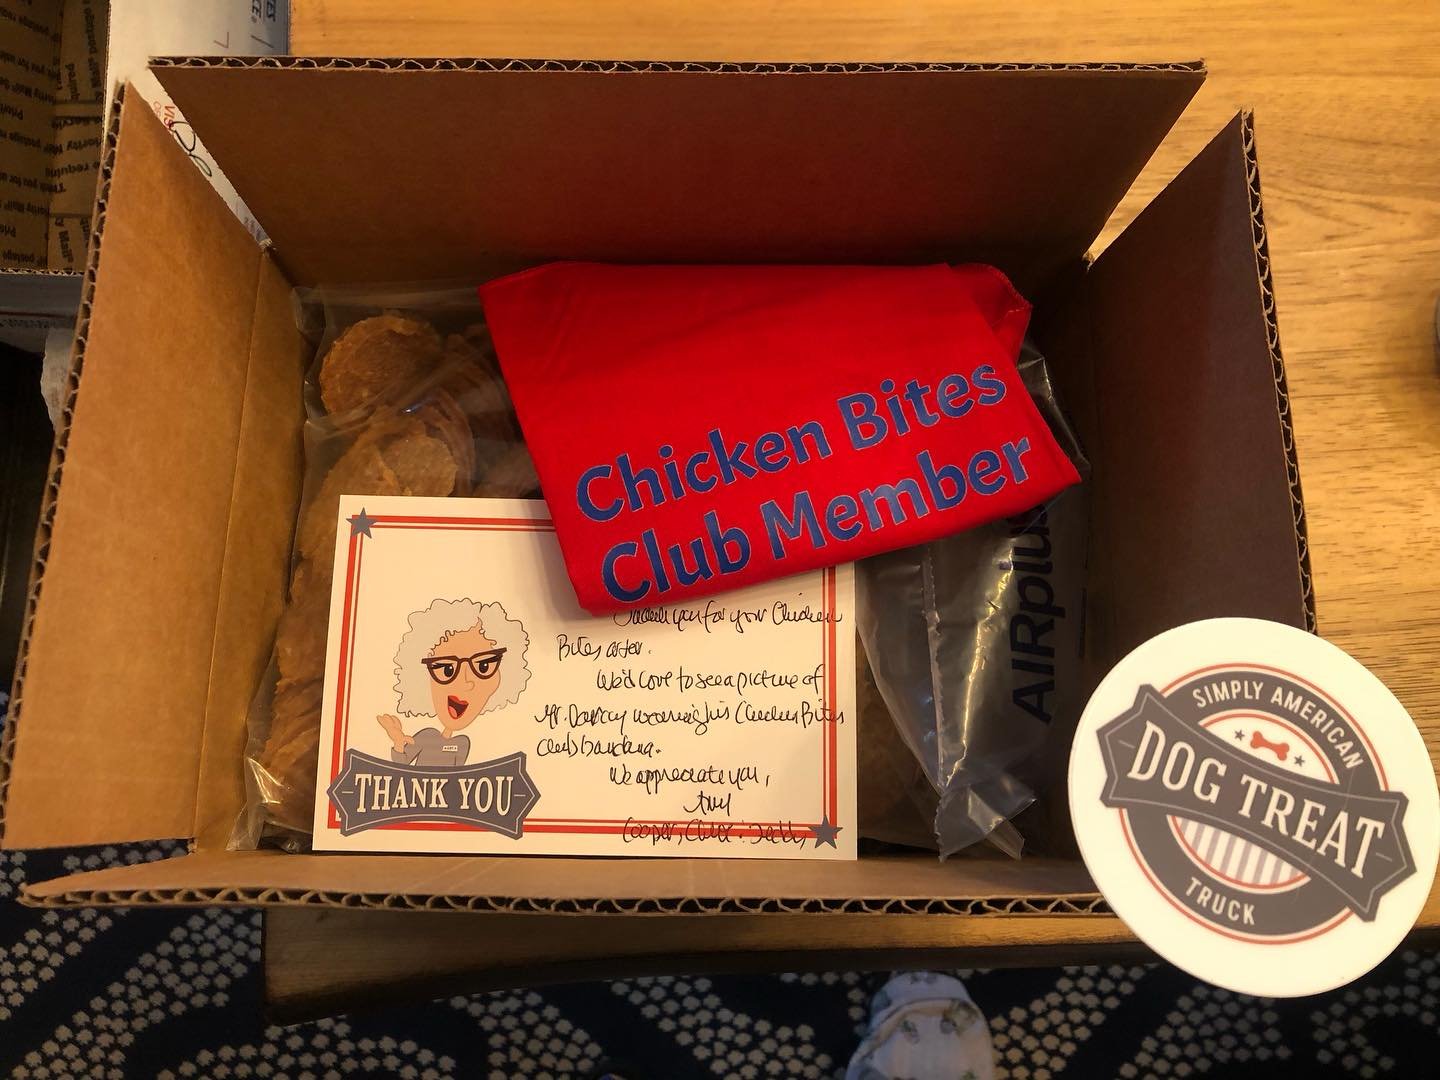 Chicken Bites Club members! Look for a spiffy bandana in your next order. At checkout click the boxes of how many dogs you have and their neck sizes. Easy breezy. Post pics on social media, tag us and let&rsquo;s grow the club together. Wanna join? O